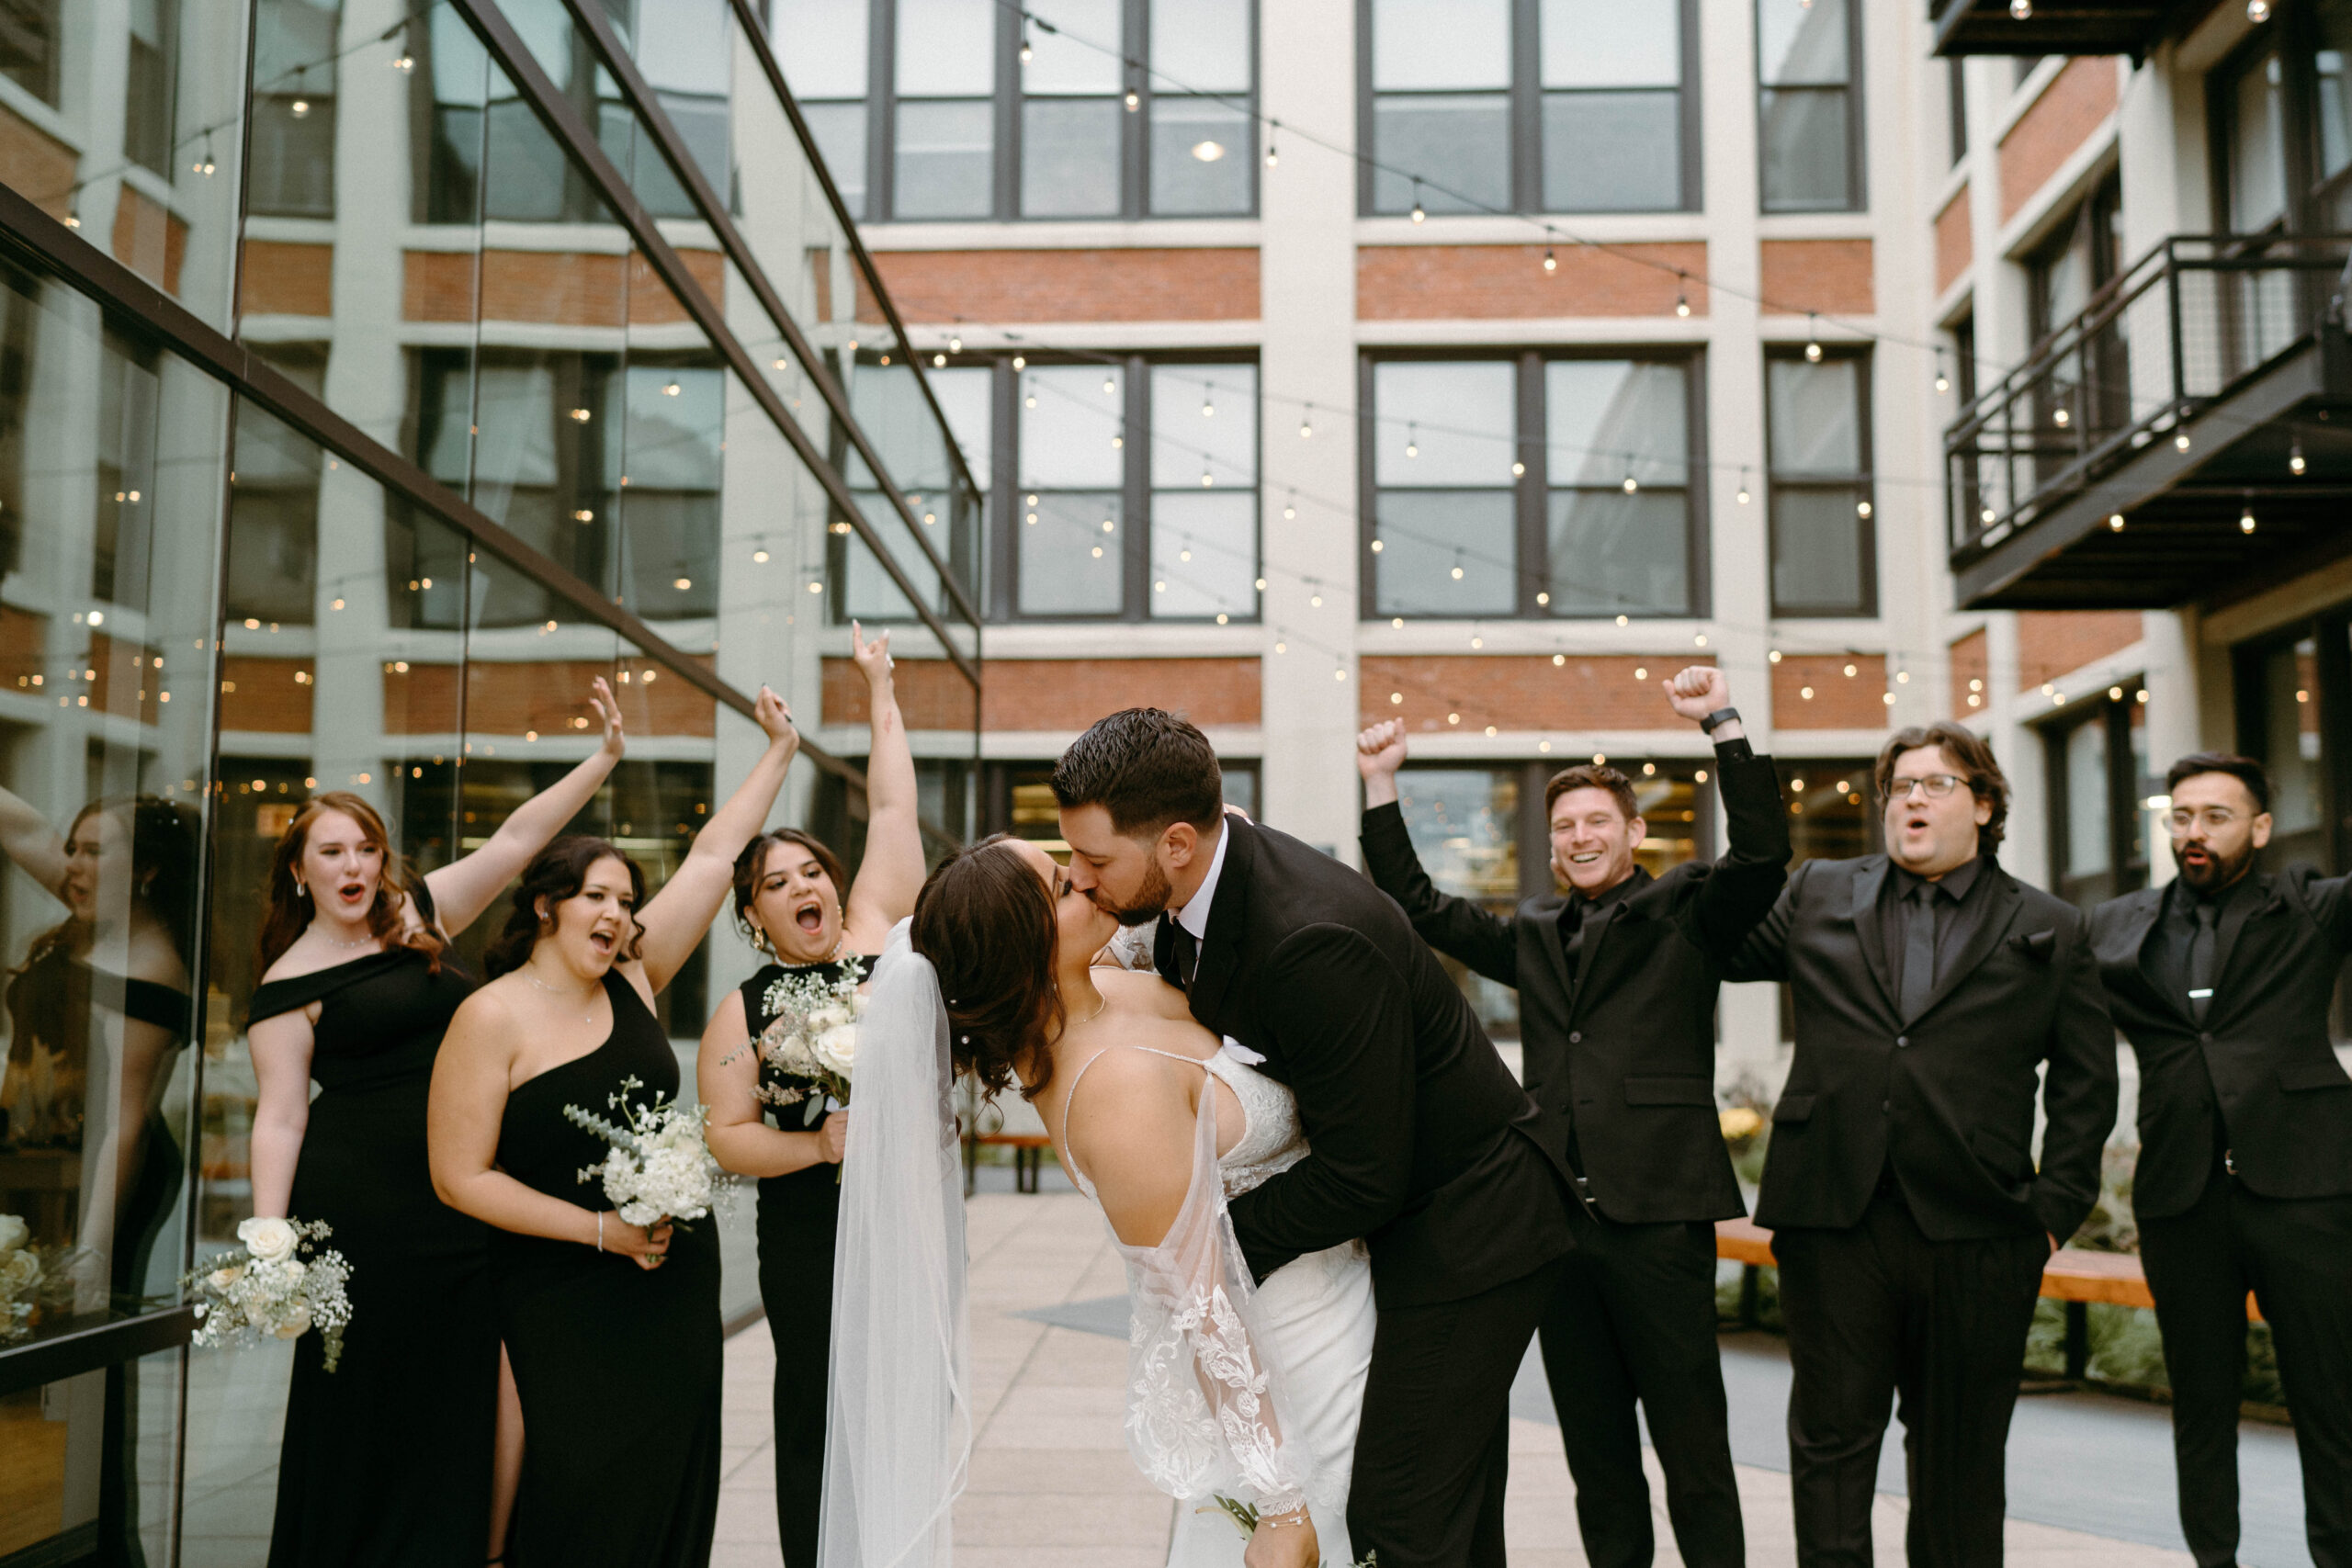 wedding party cheering on bride and groom as they go for a kiss